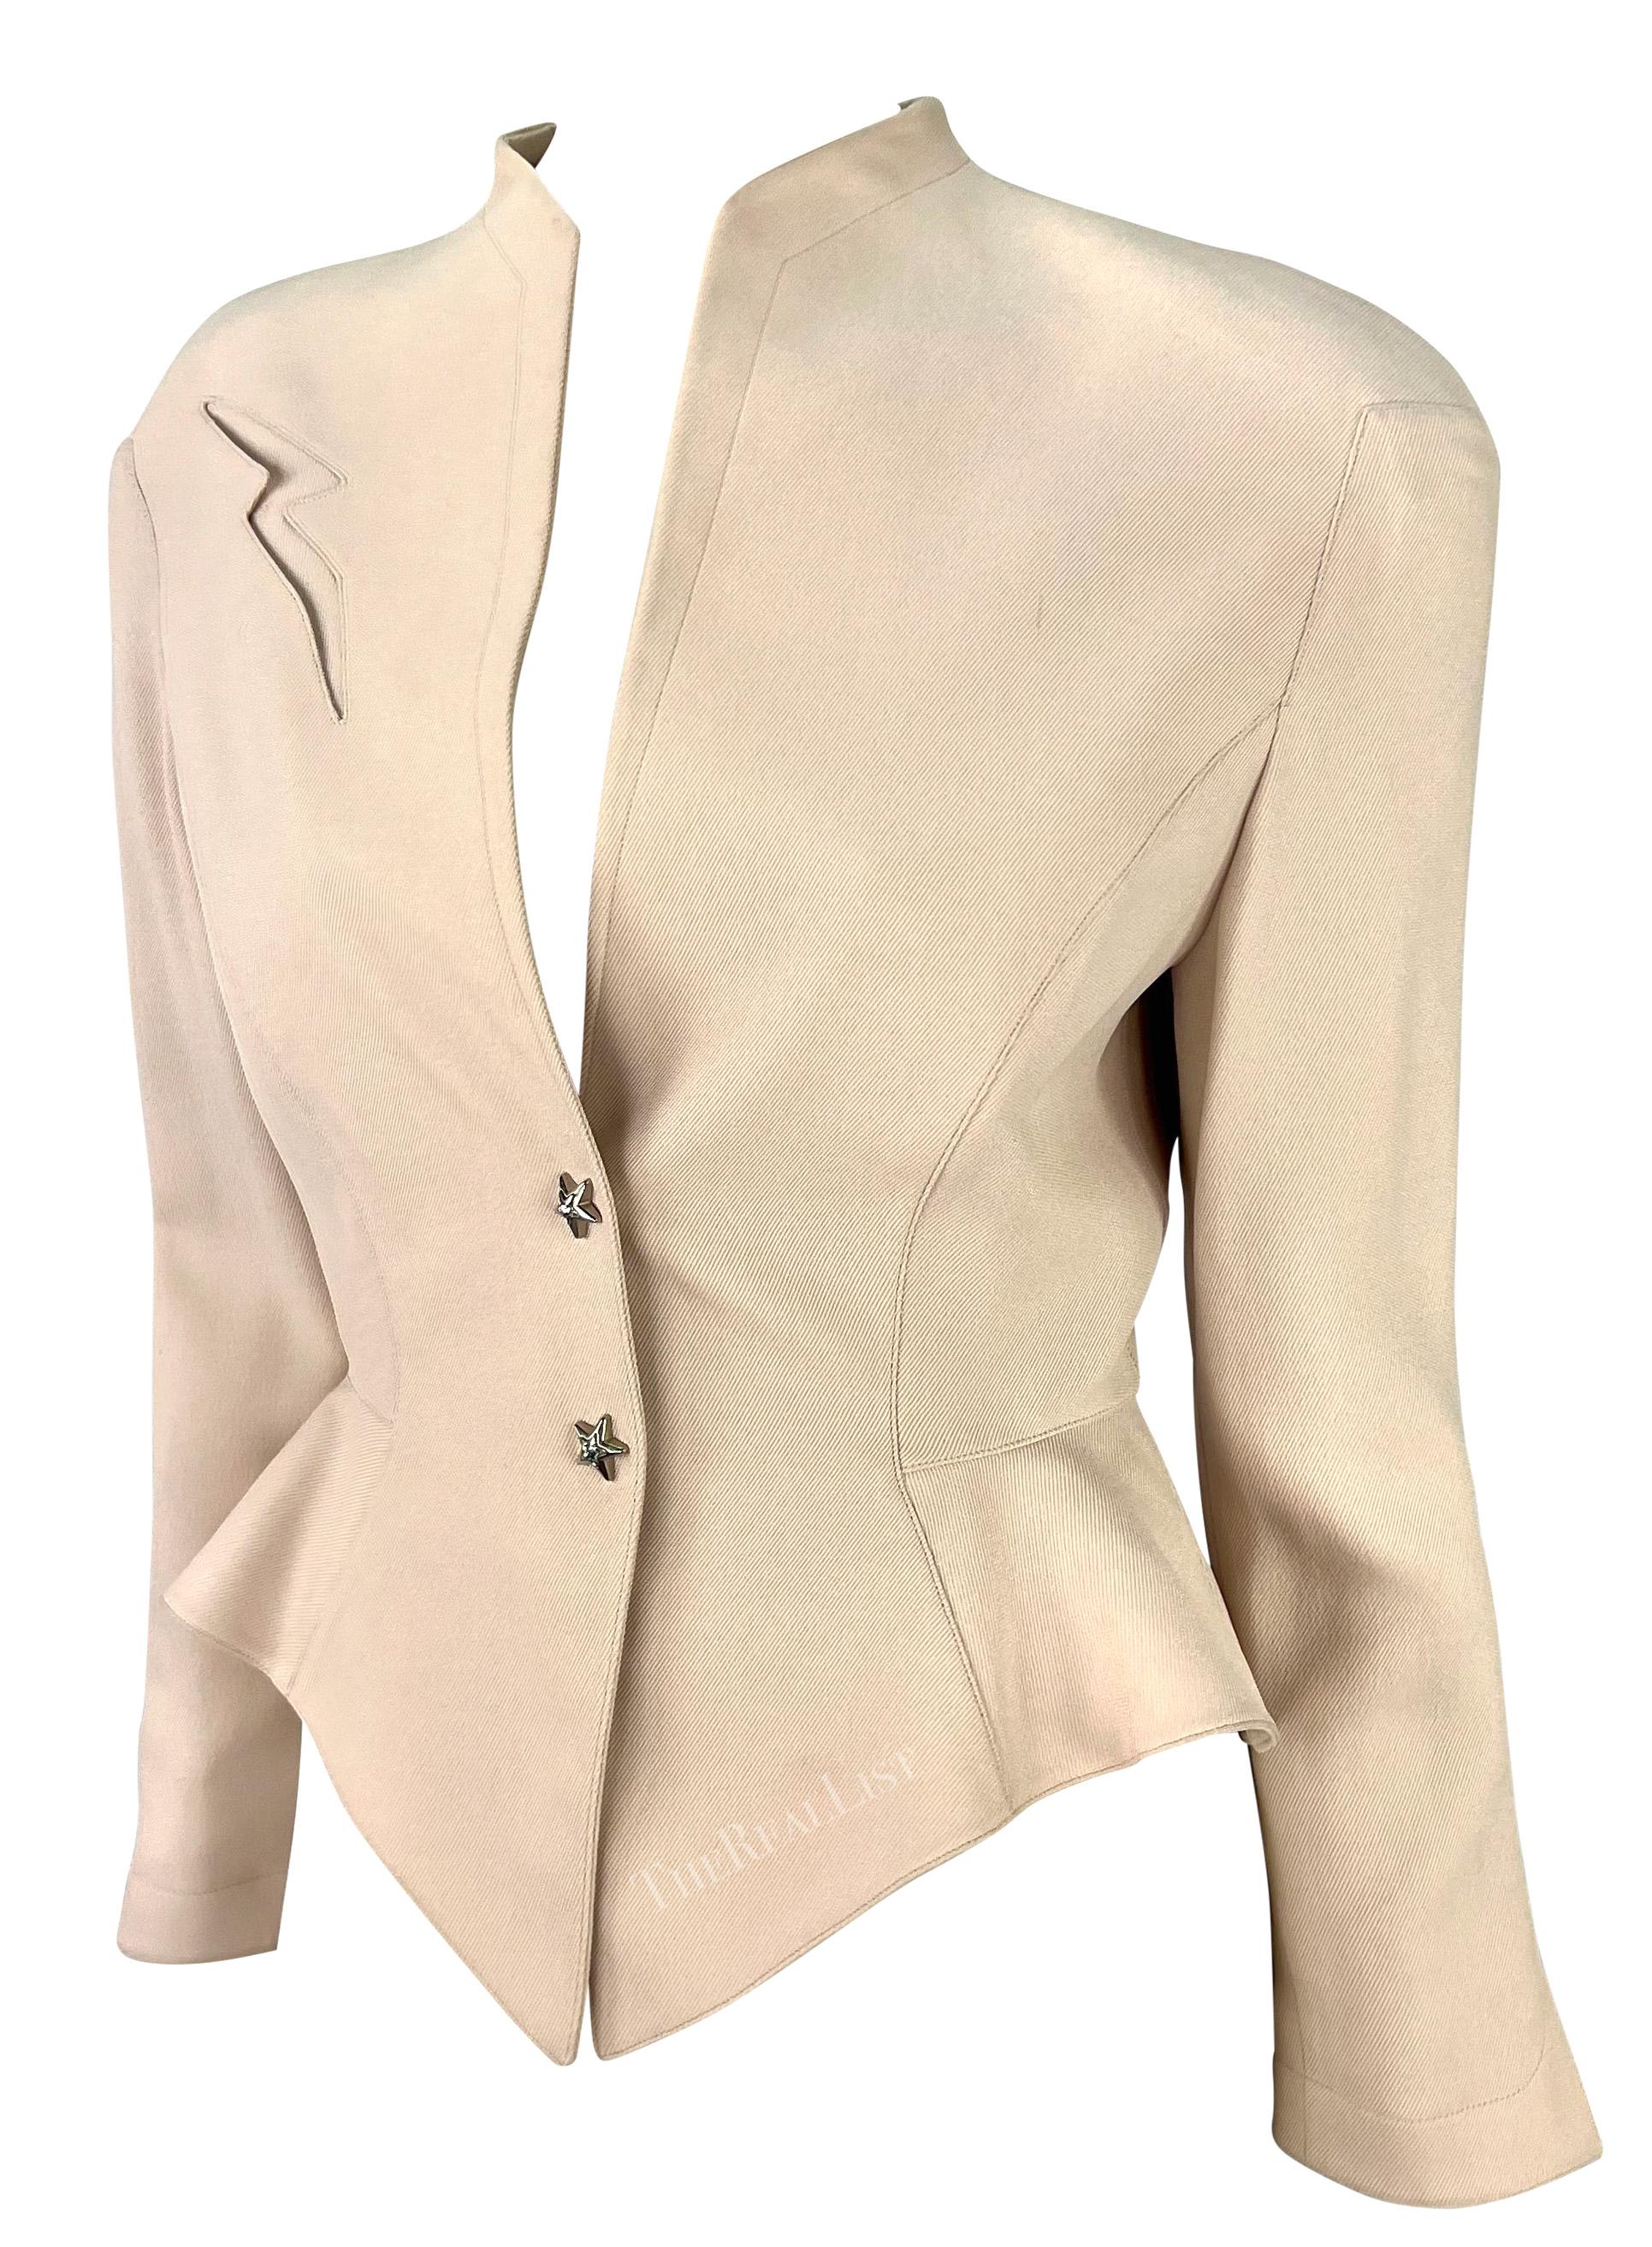 NWT Early 1990s Thierry Mugler Rhinestone Star Cinched Blush Pink Blazer Jacket In Excellent Condition For Sale In West Hollywood, CA